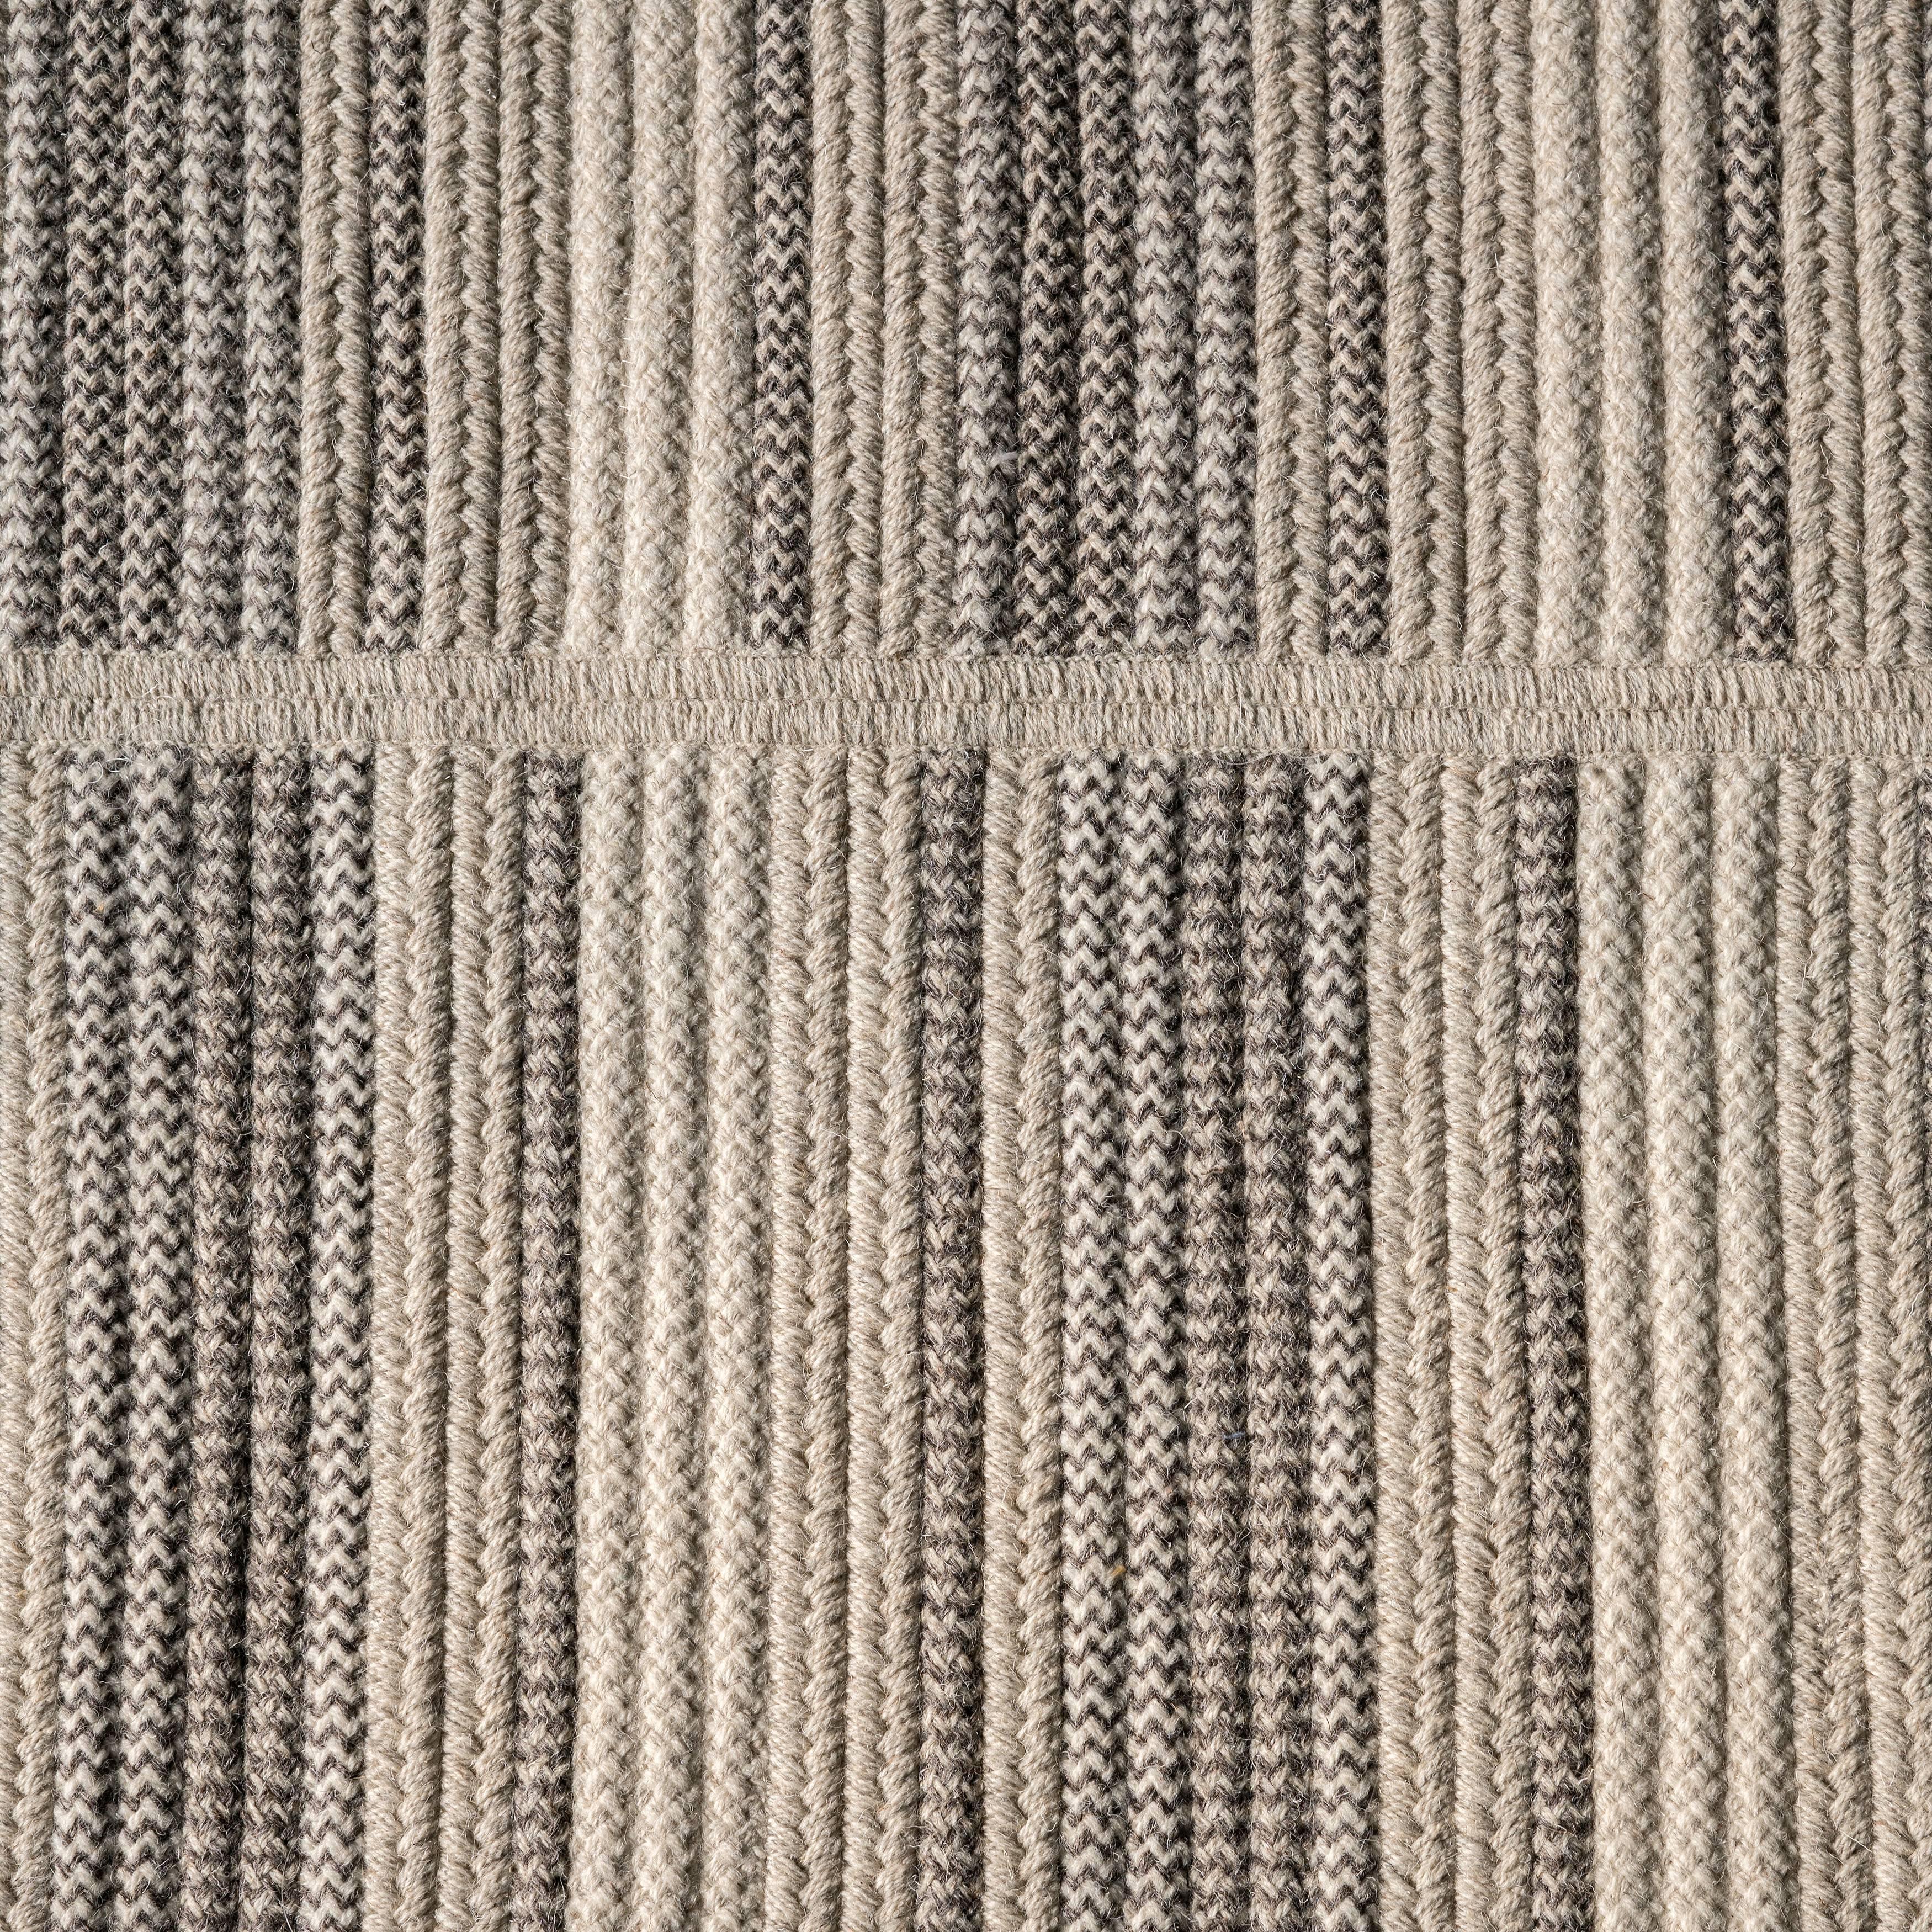 Path grey natural un-dyed wool stripe 8 x 10 Reversible rug. Natural un-dyed wools in light grey, dark grey, natural and cream are combined in various braid styles and techniques. Each band is cut and sewn to add pattern and texture.  Designed in